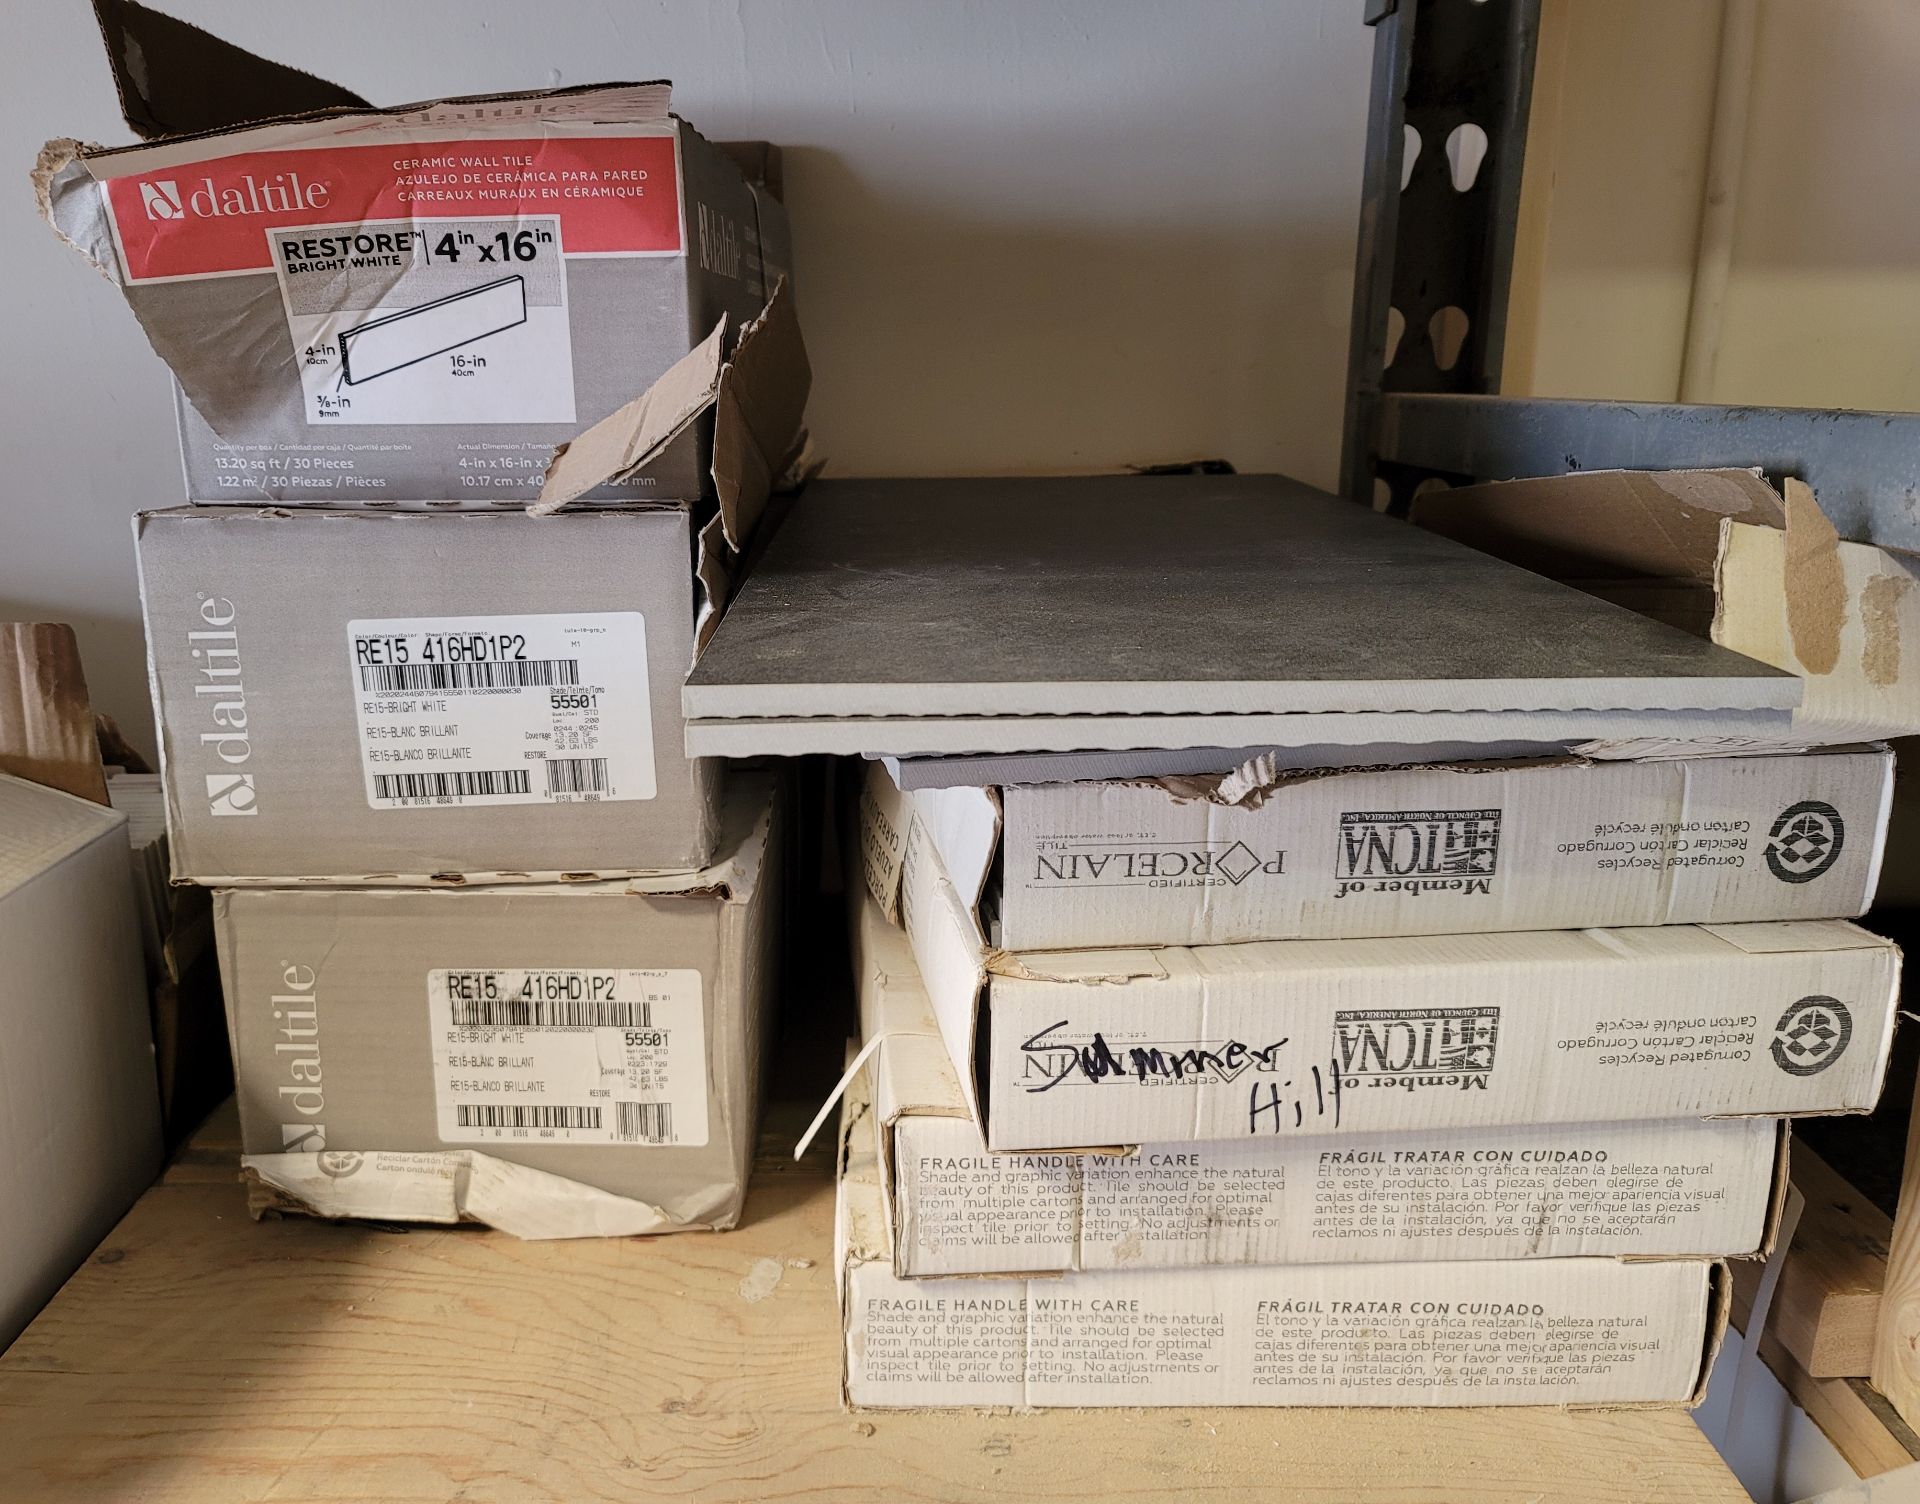 LOT - CONTENTS OF 11' SHELF FULL OF TILE AND TILE INSTALLATION ITEMS (LOCATION: SAN DIEGO, CA) - Image 2 of 6